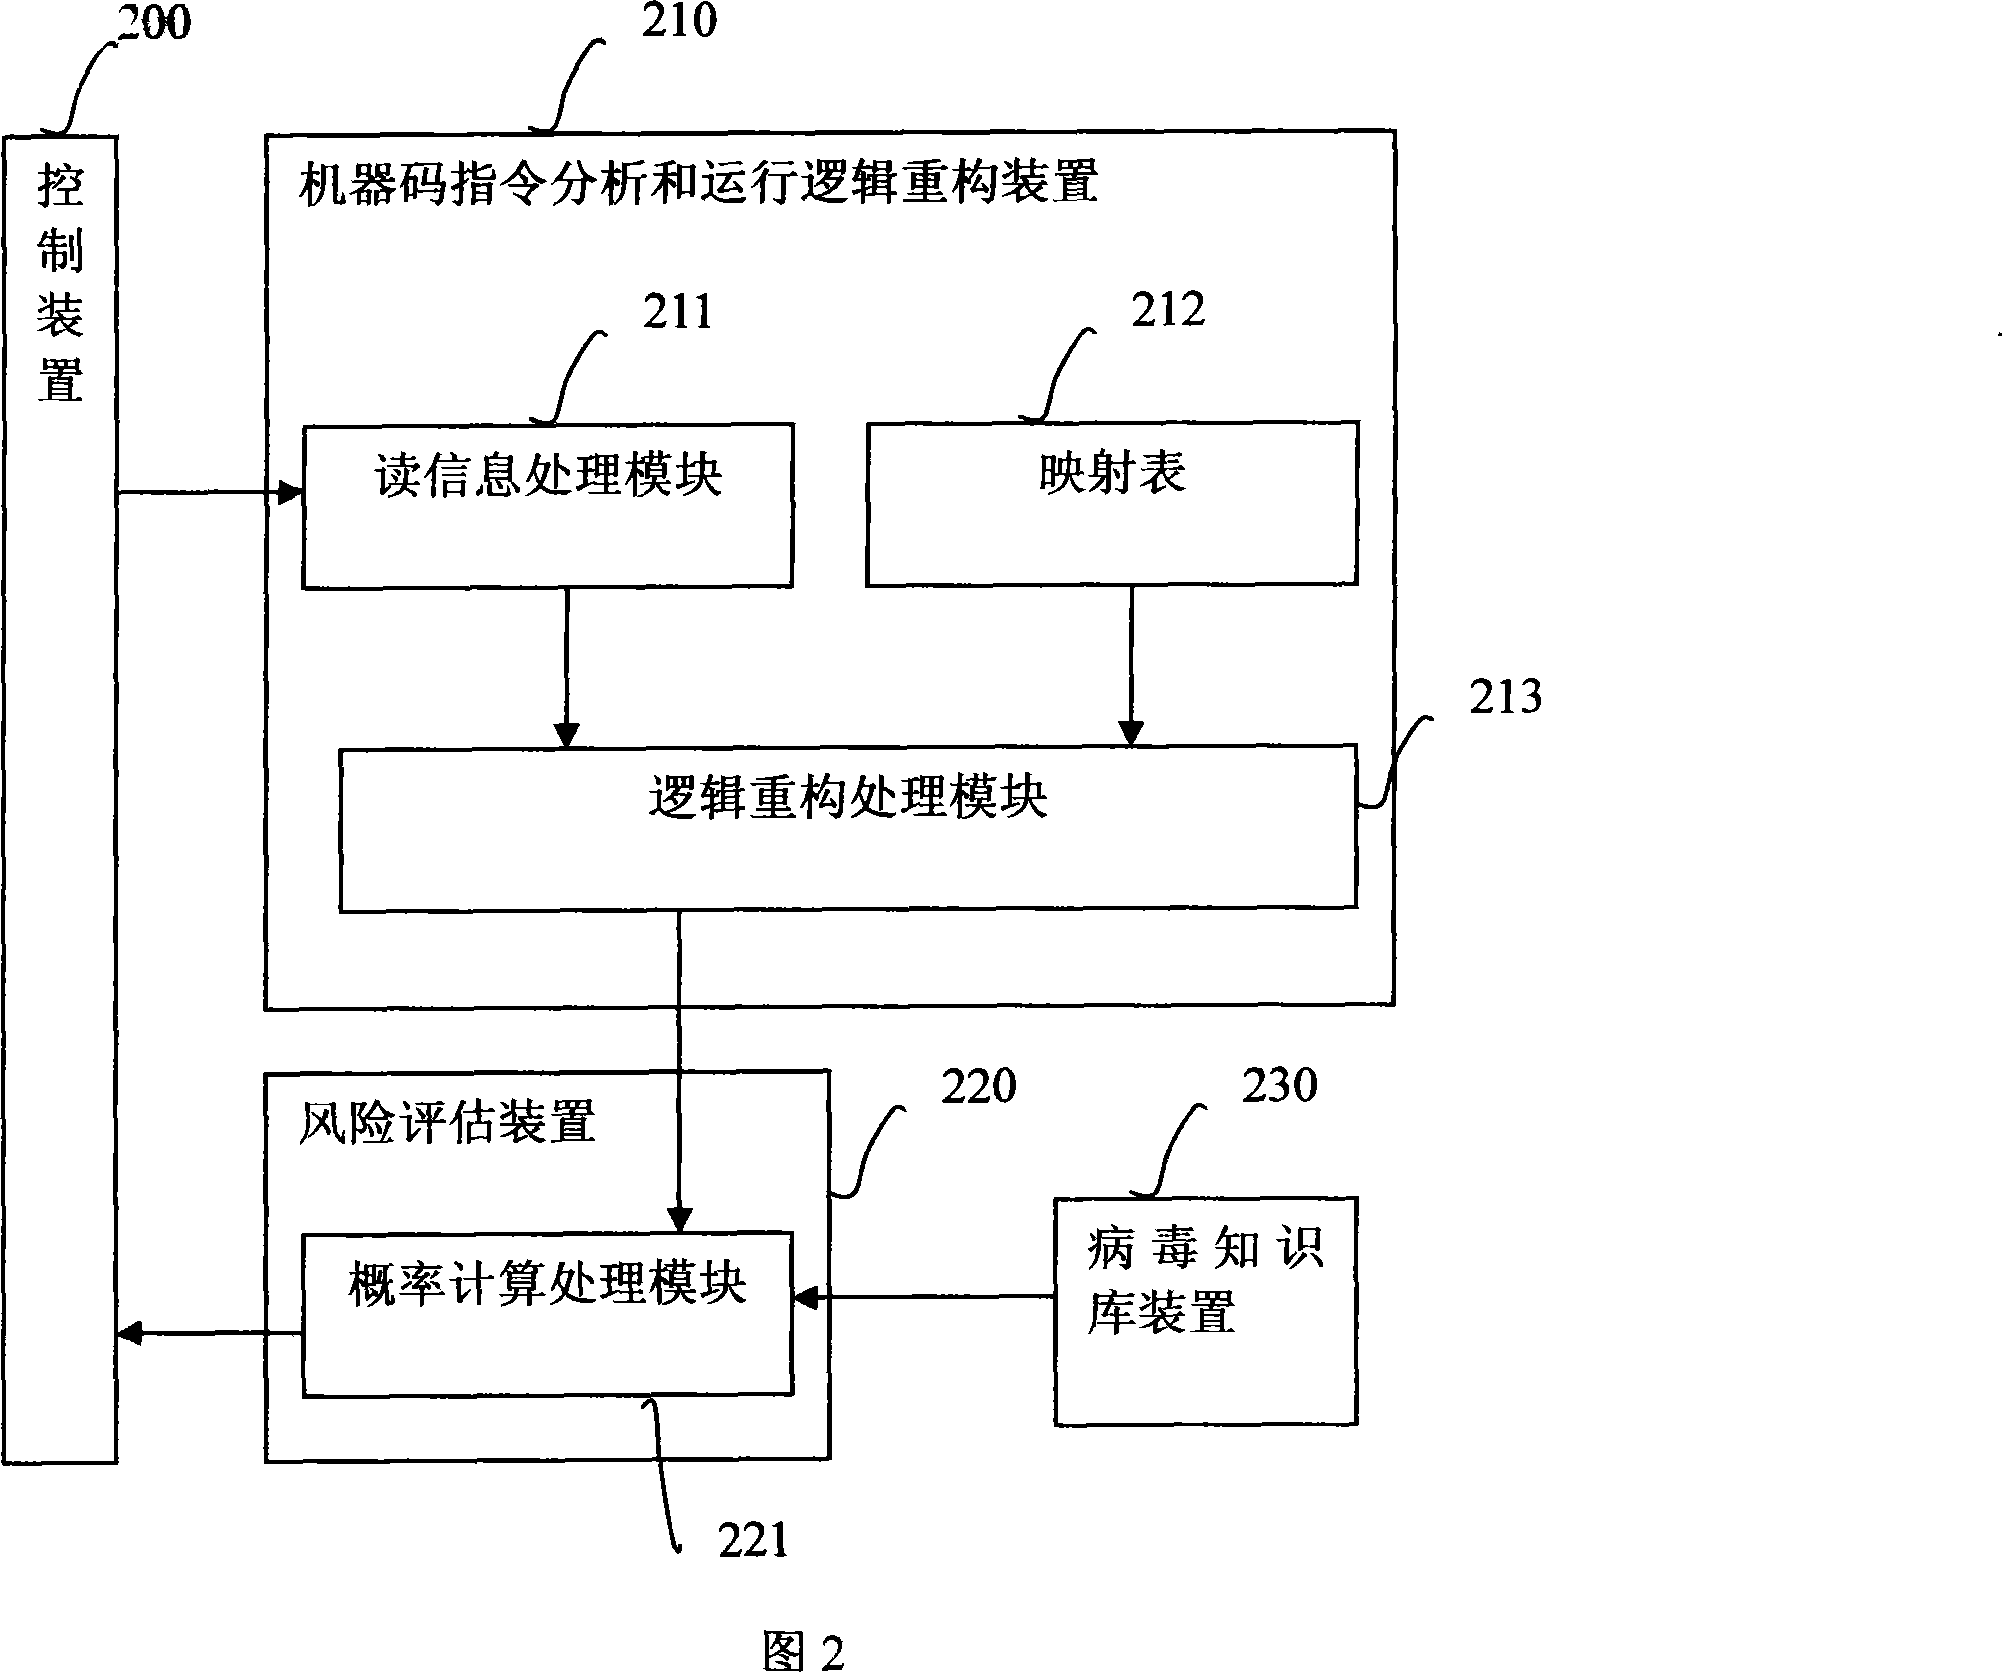 Method and device for preventing from computer virus